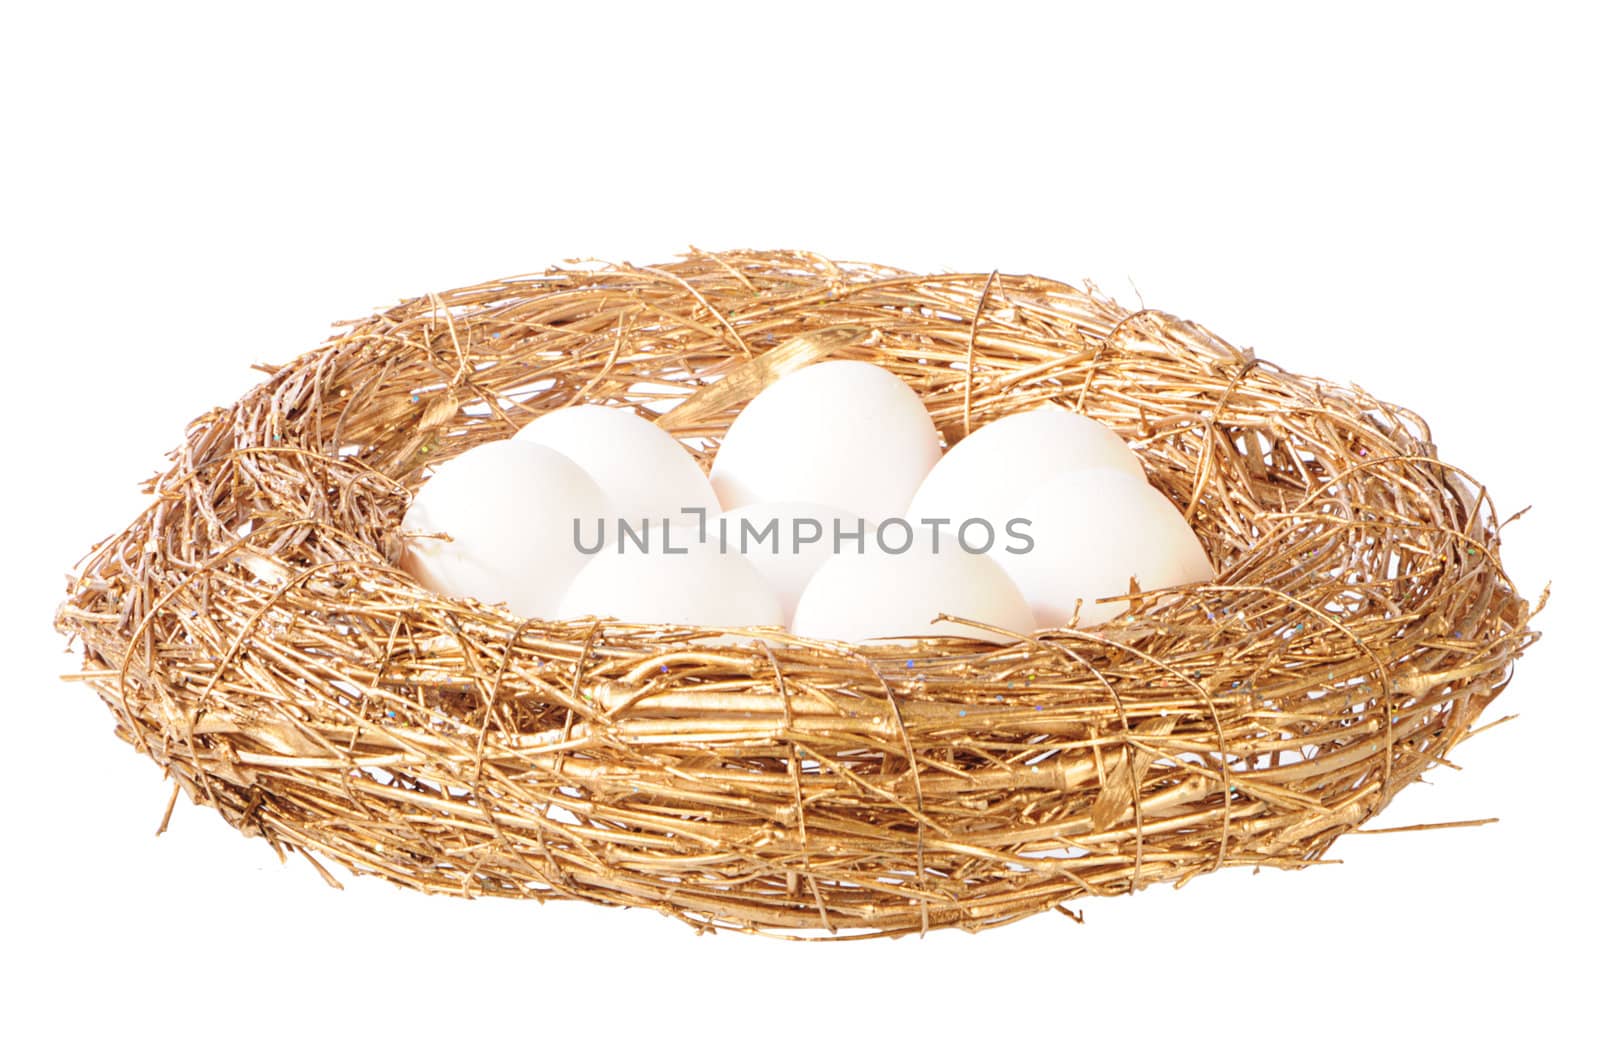 white eggs in golden nest by dyoma